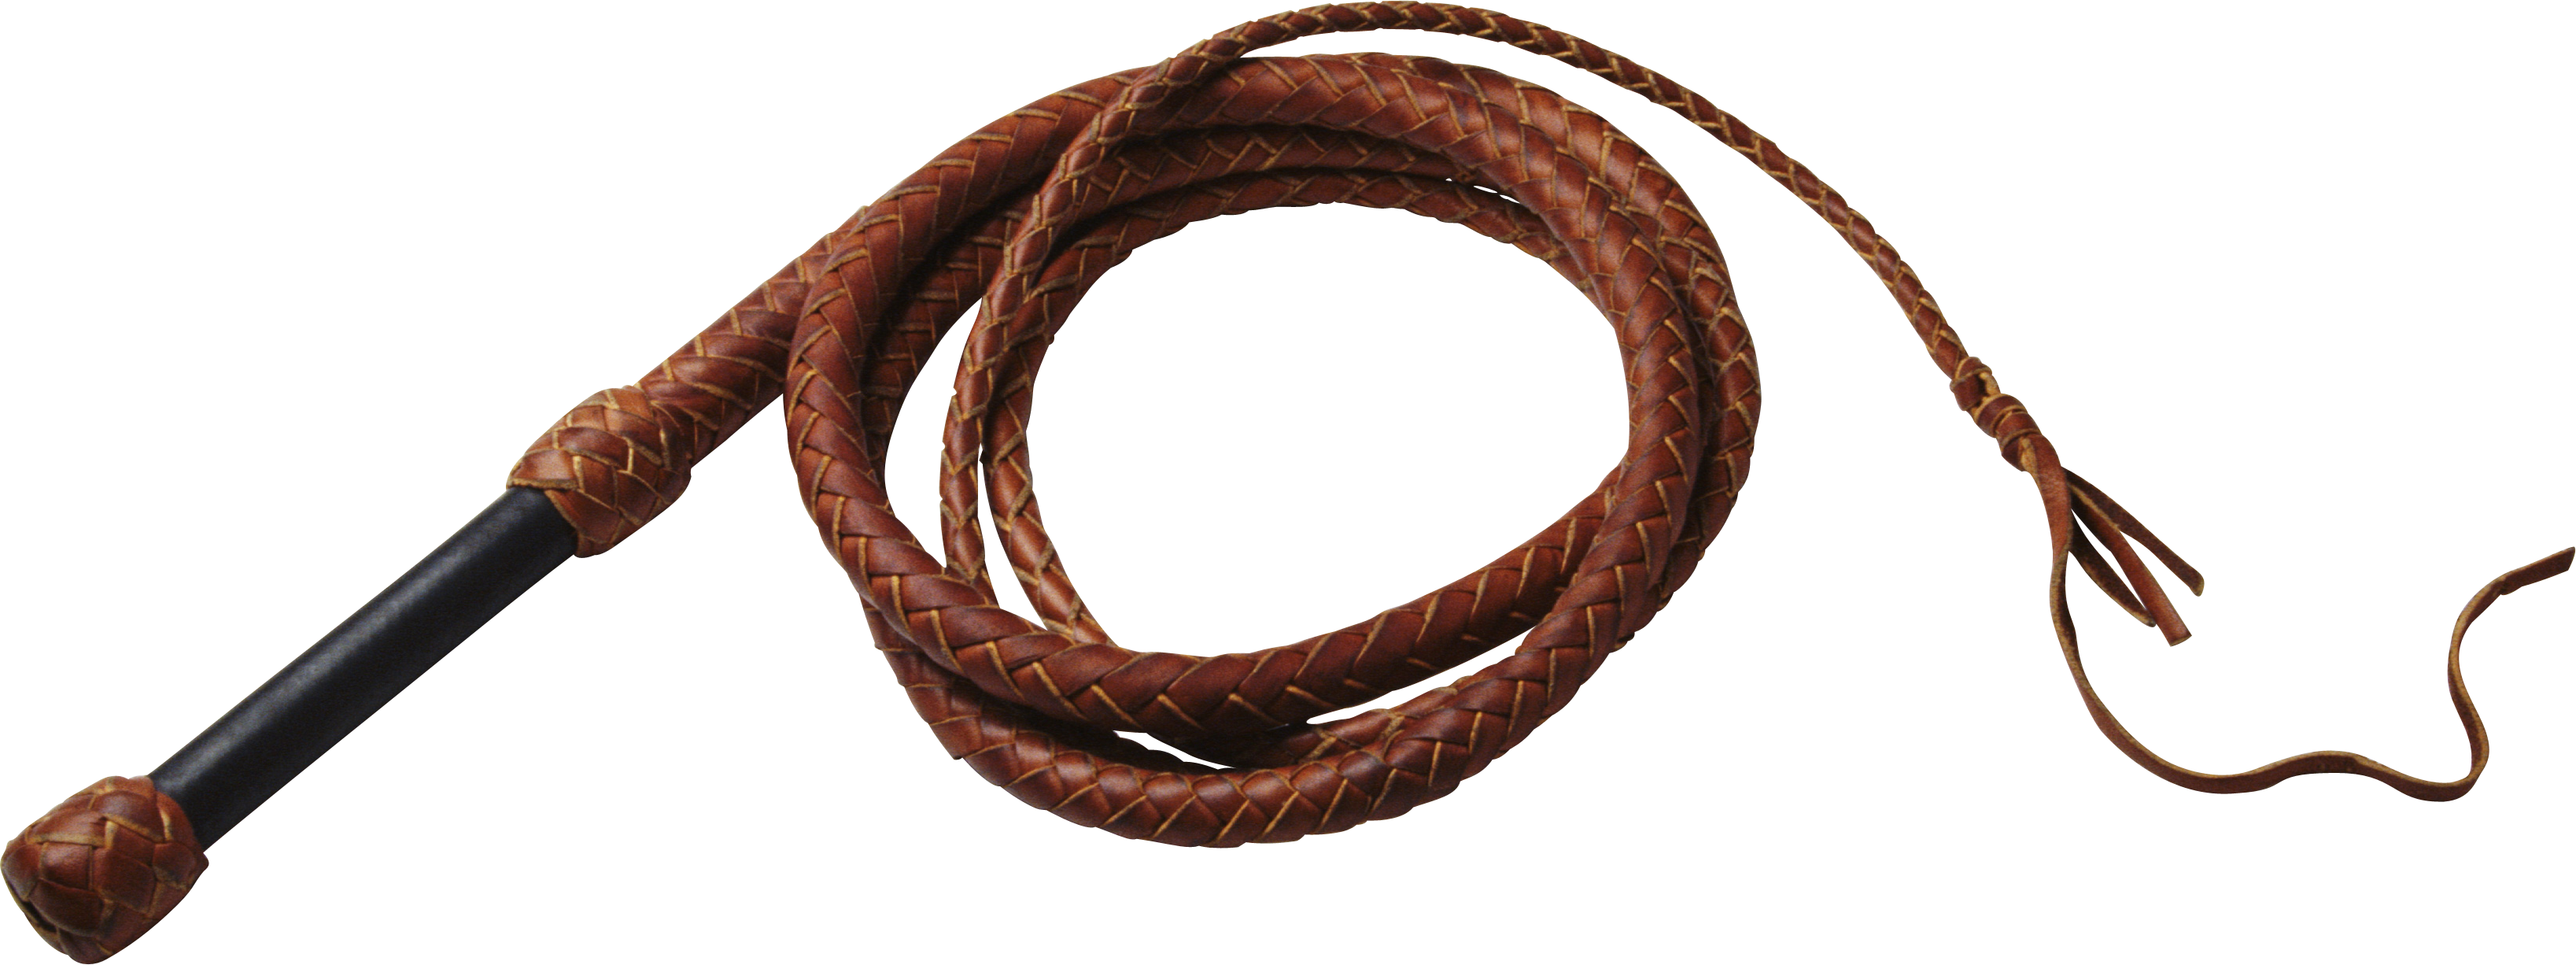 Whip PNG Free File Download